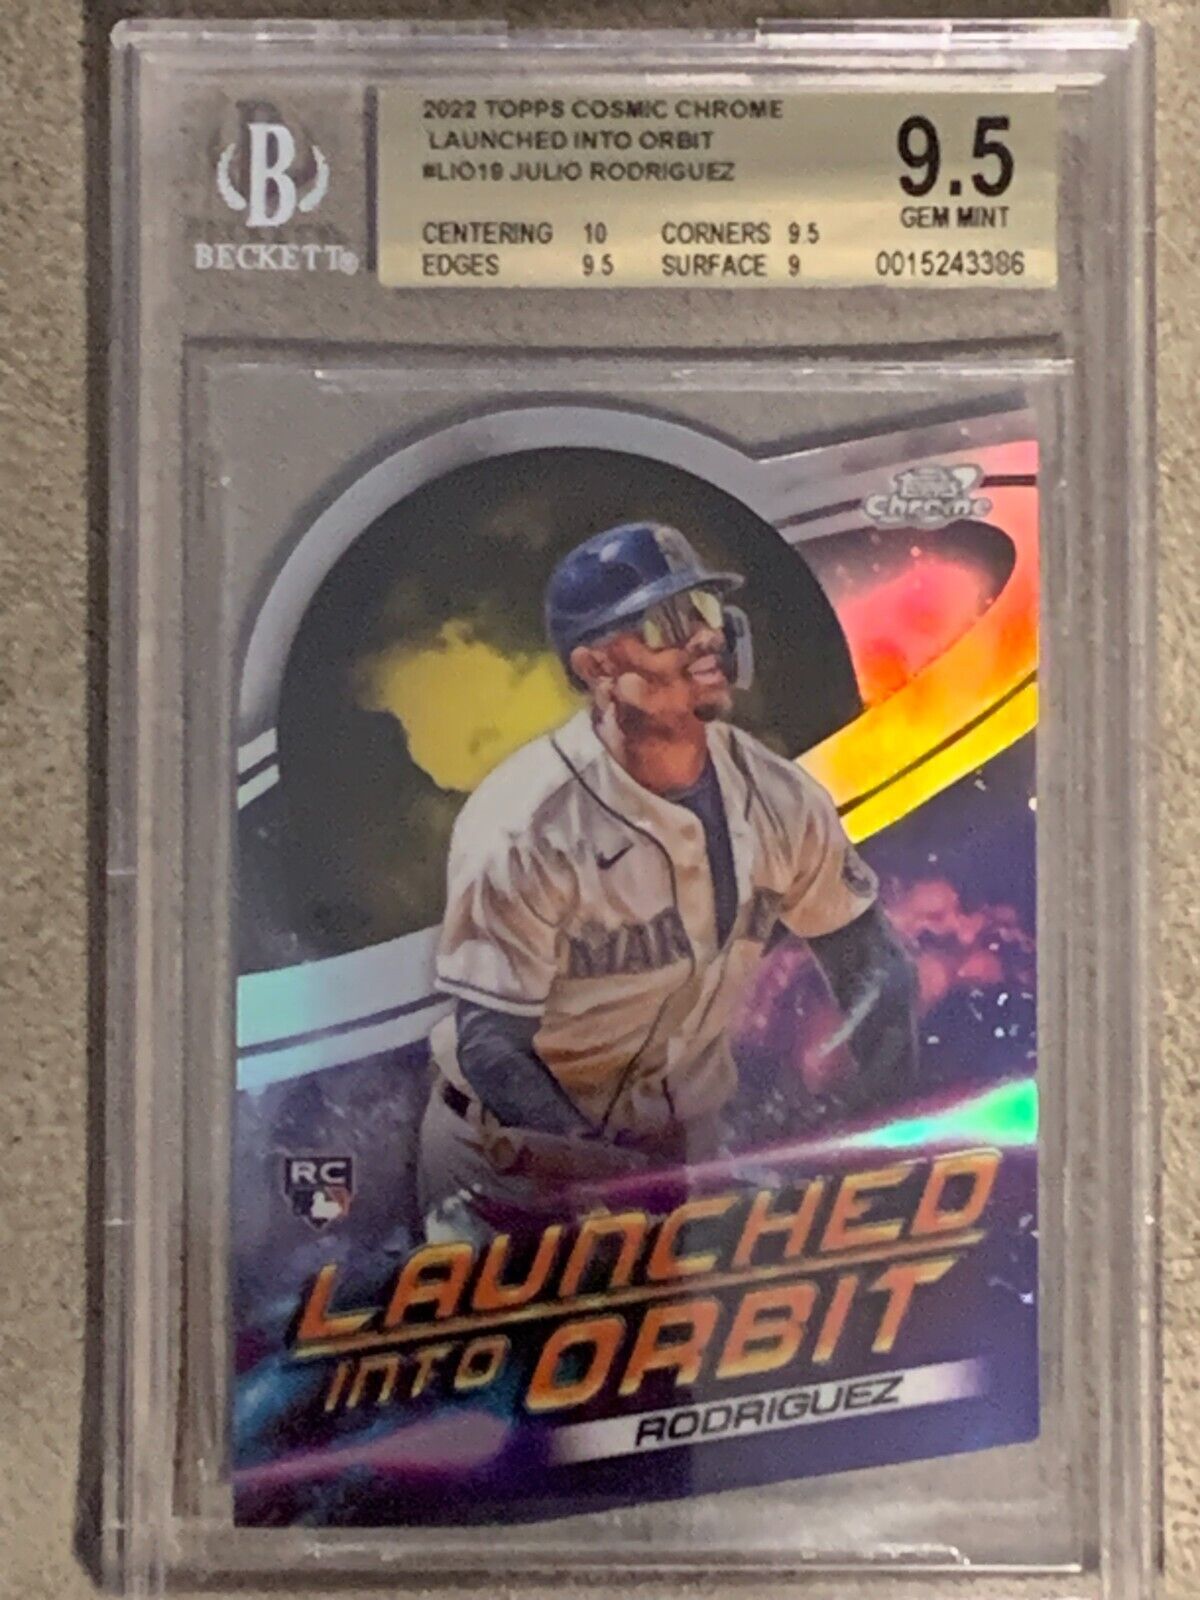 2022 Topps Cosmic Chrome Launched Into Orbit Julio Rodriguez BGS 9.5 Rookie